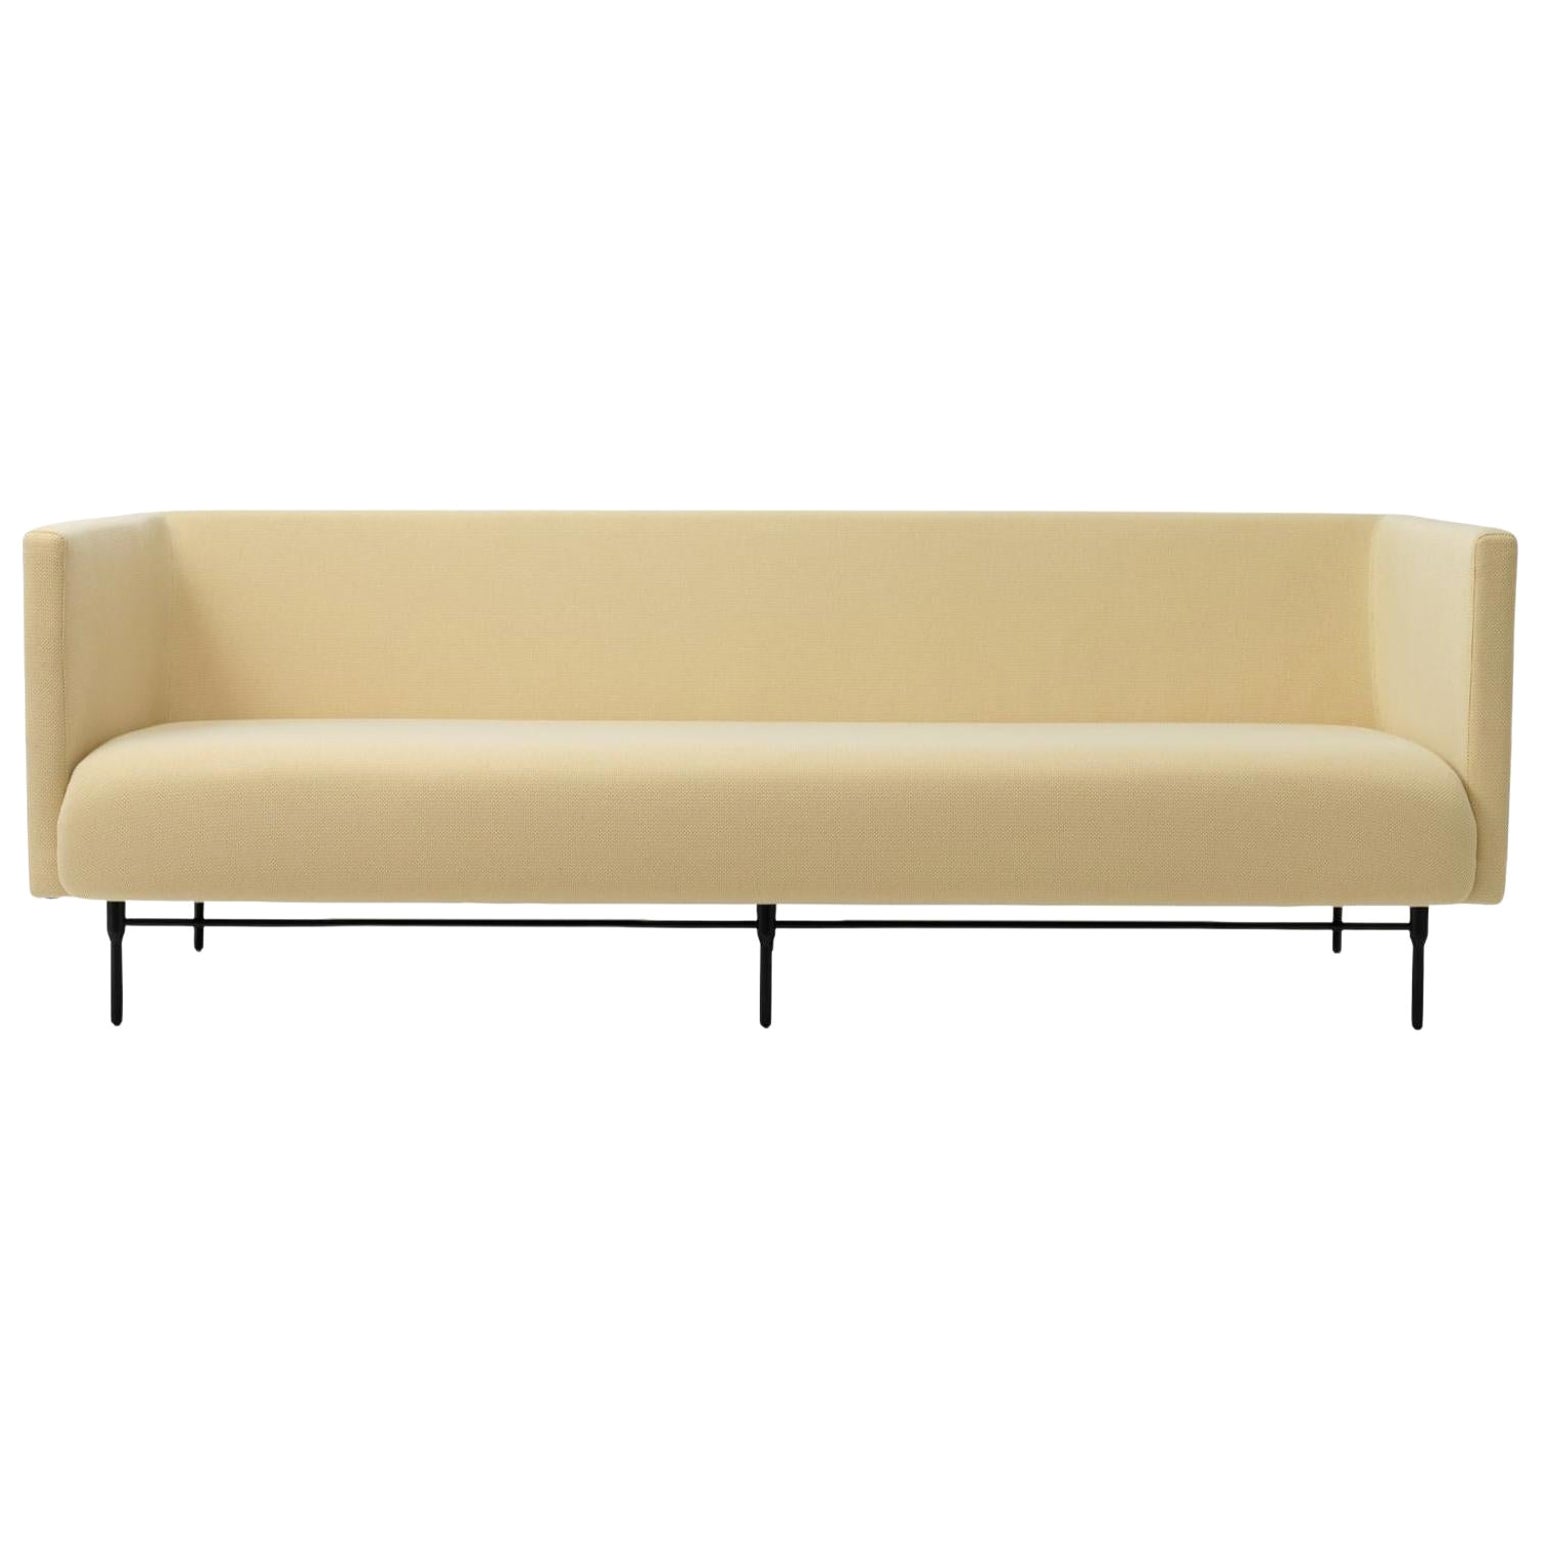 Galore 3 Seater Daffodil by Warm Nordic